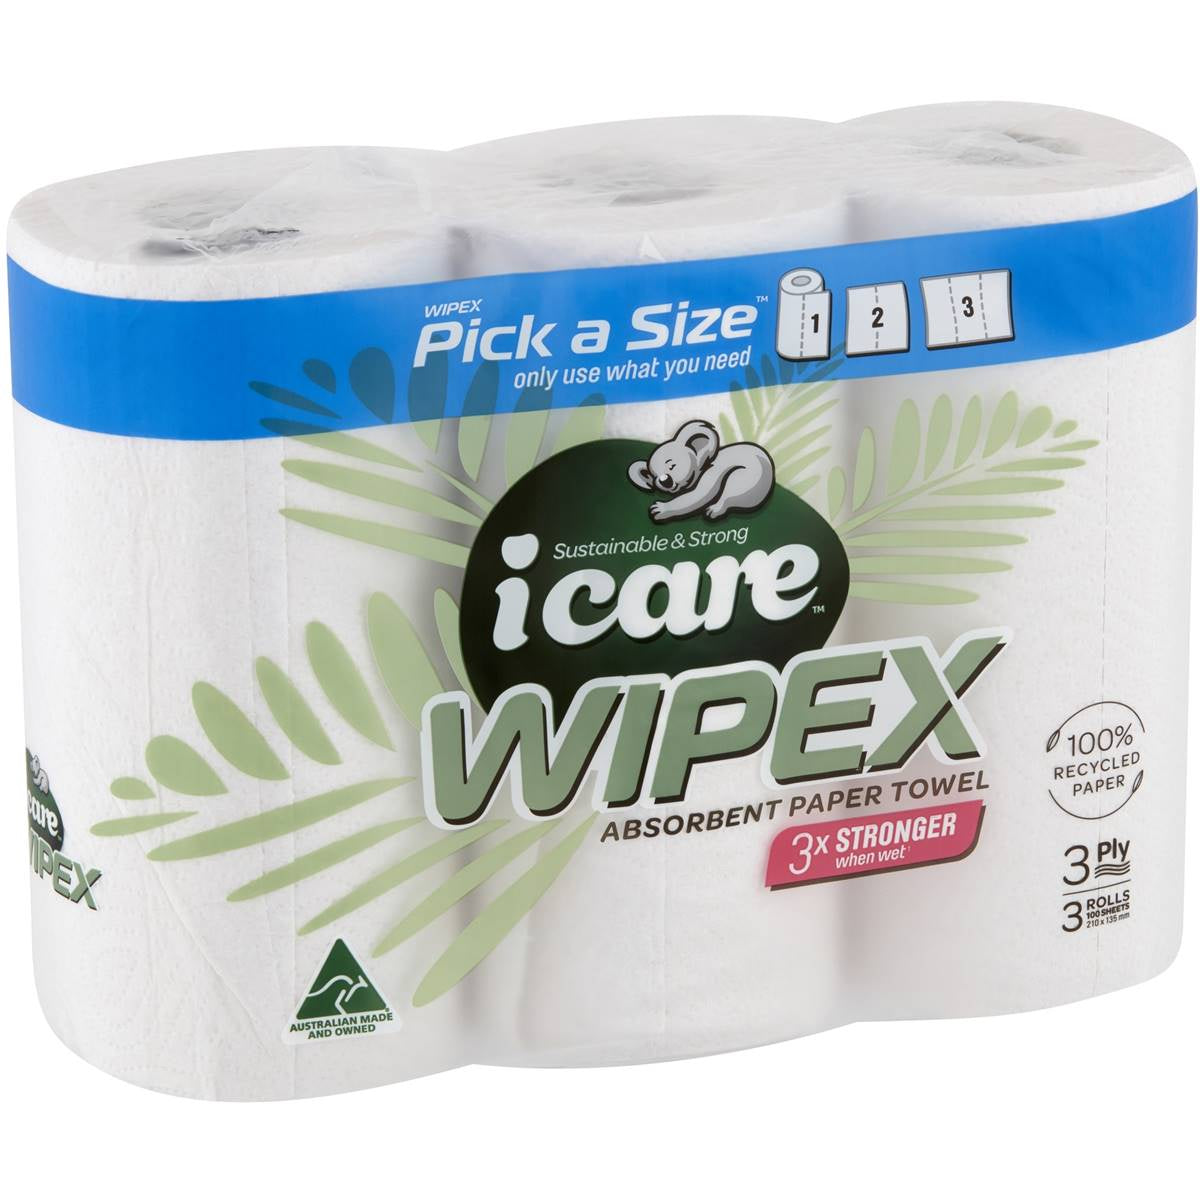 Icare Paper Towel Pick a Size 3 Ply 3pk